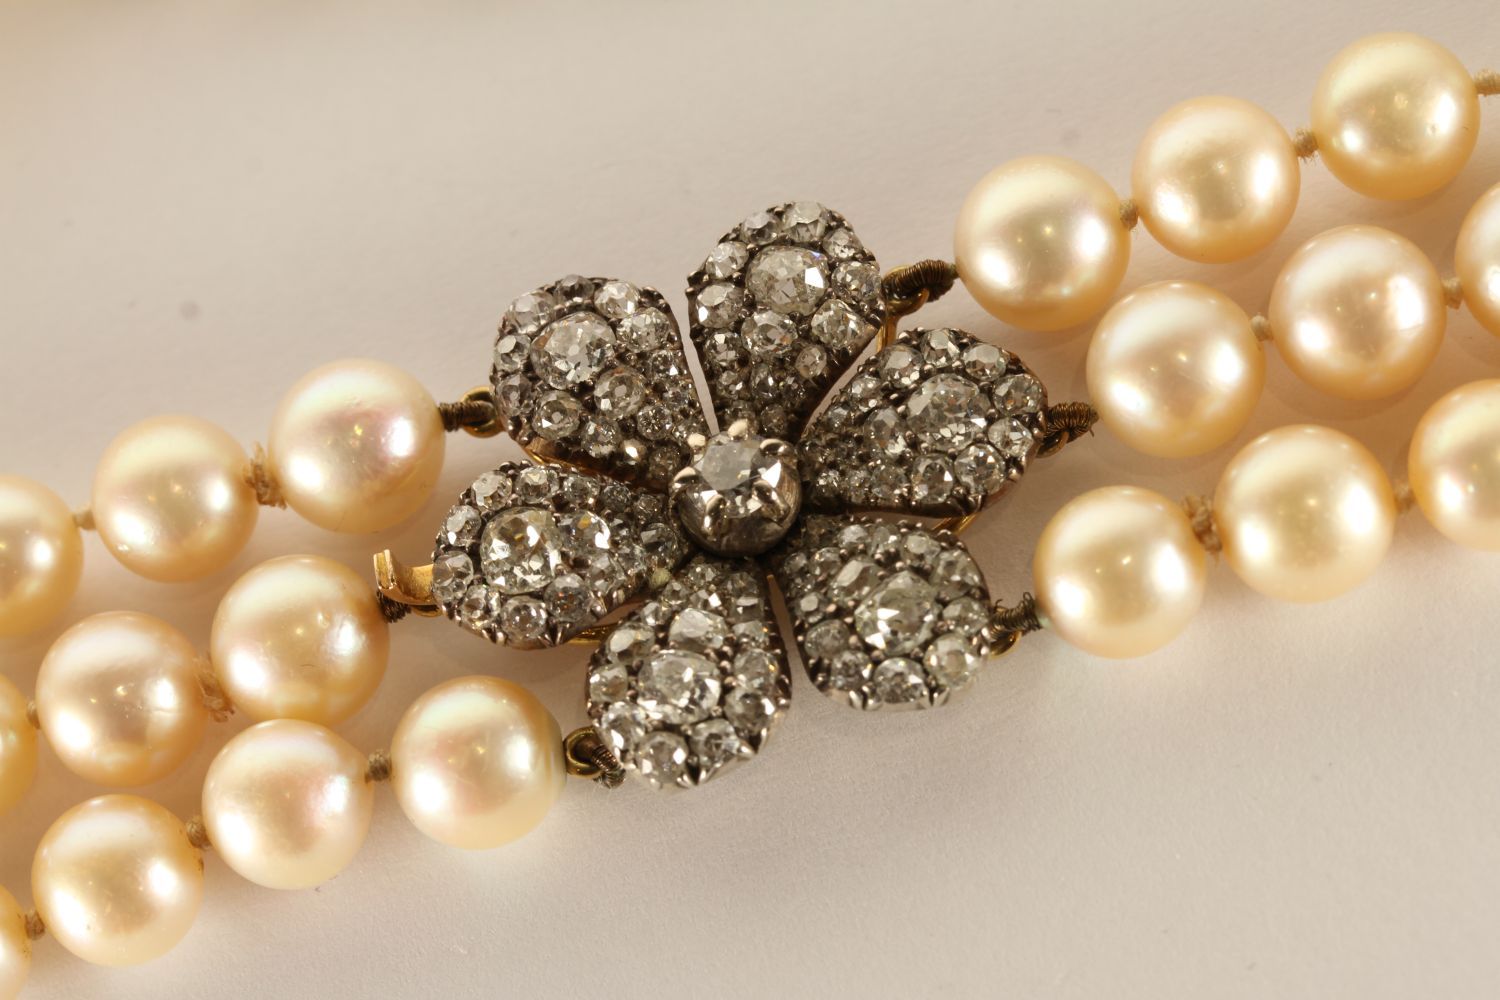 Pearl and Diamond Choker Necklace, 3 rows of pearls approximately 8.5mm - 9mm in size, diamond set - Image 2 of 3